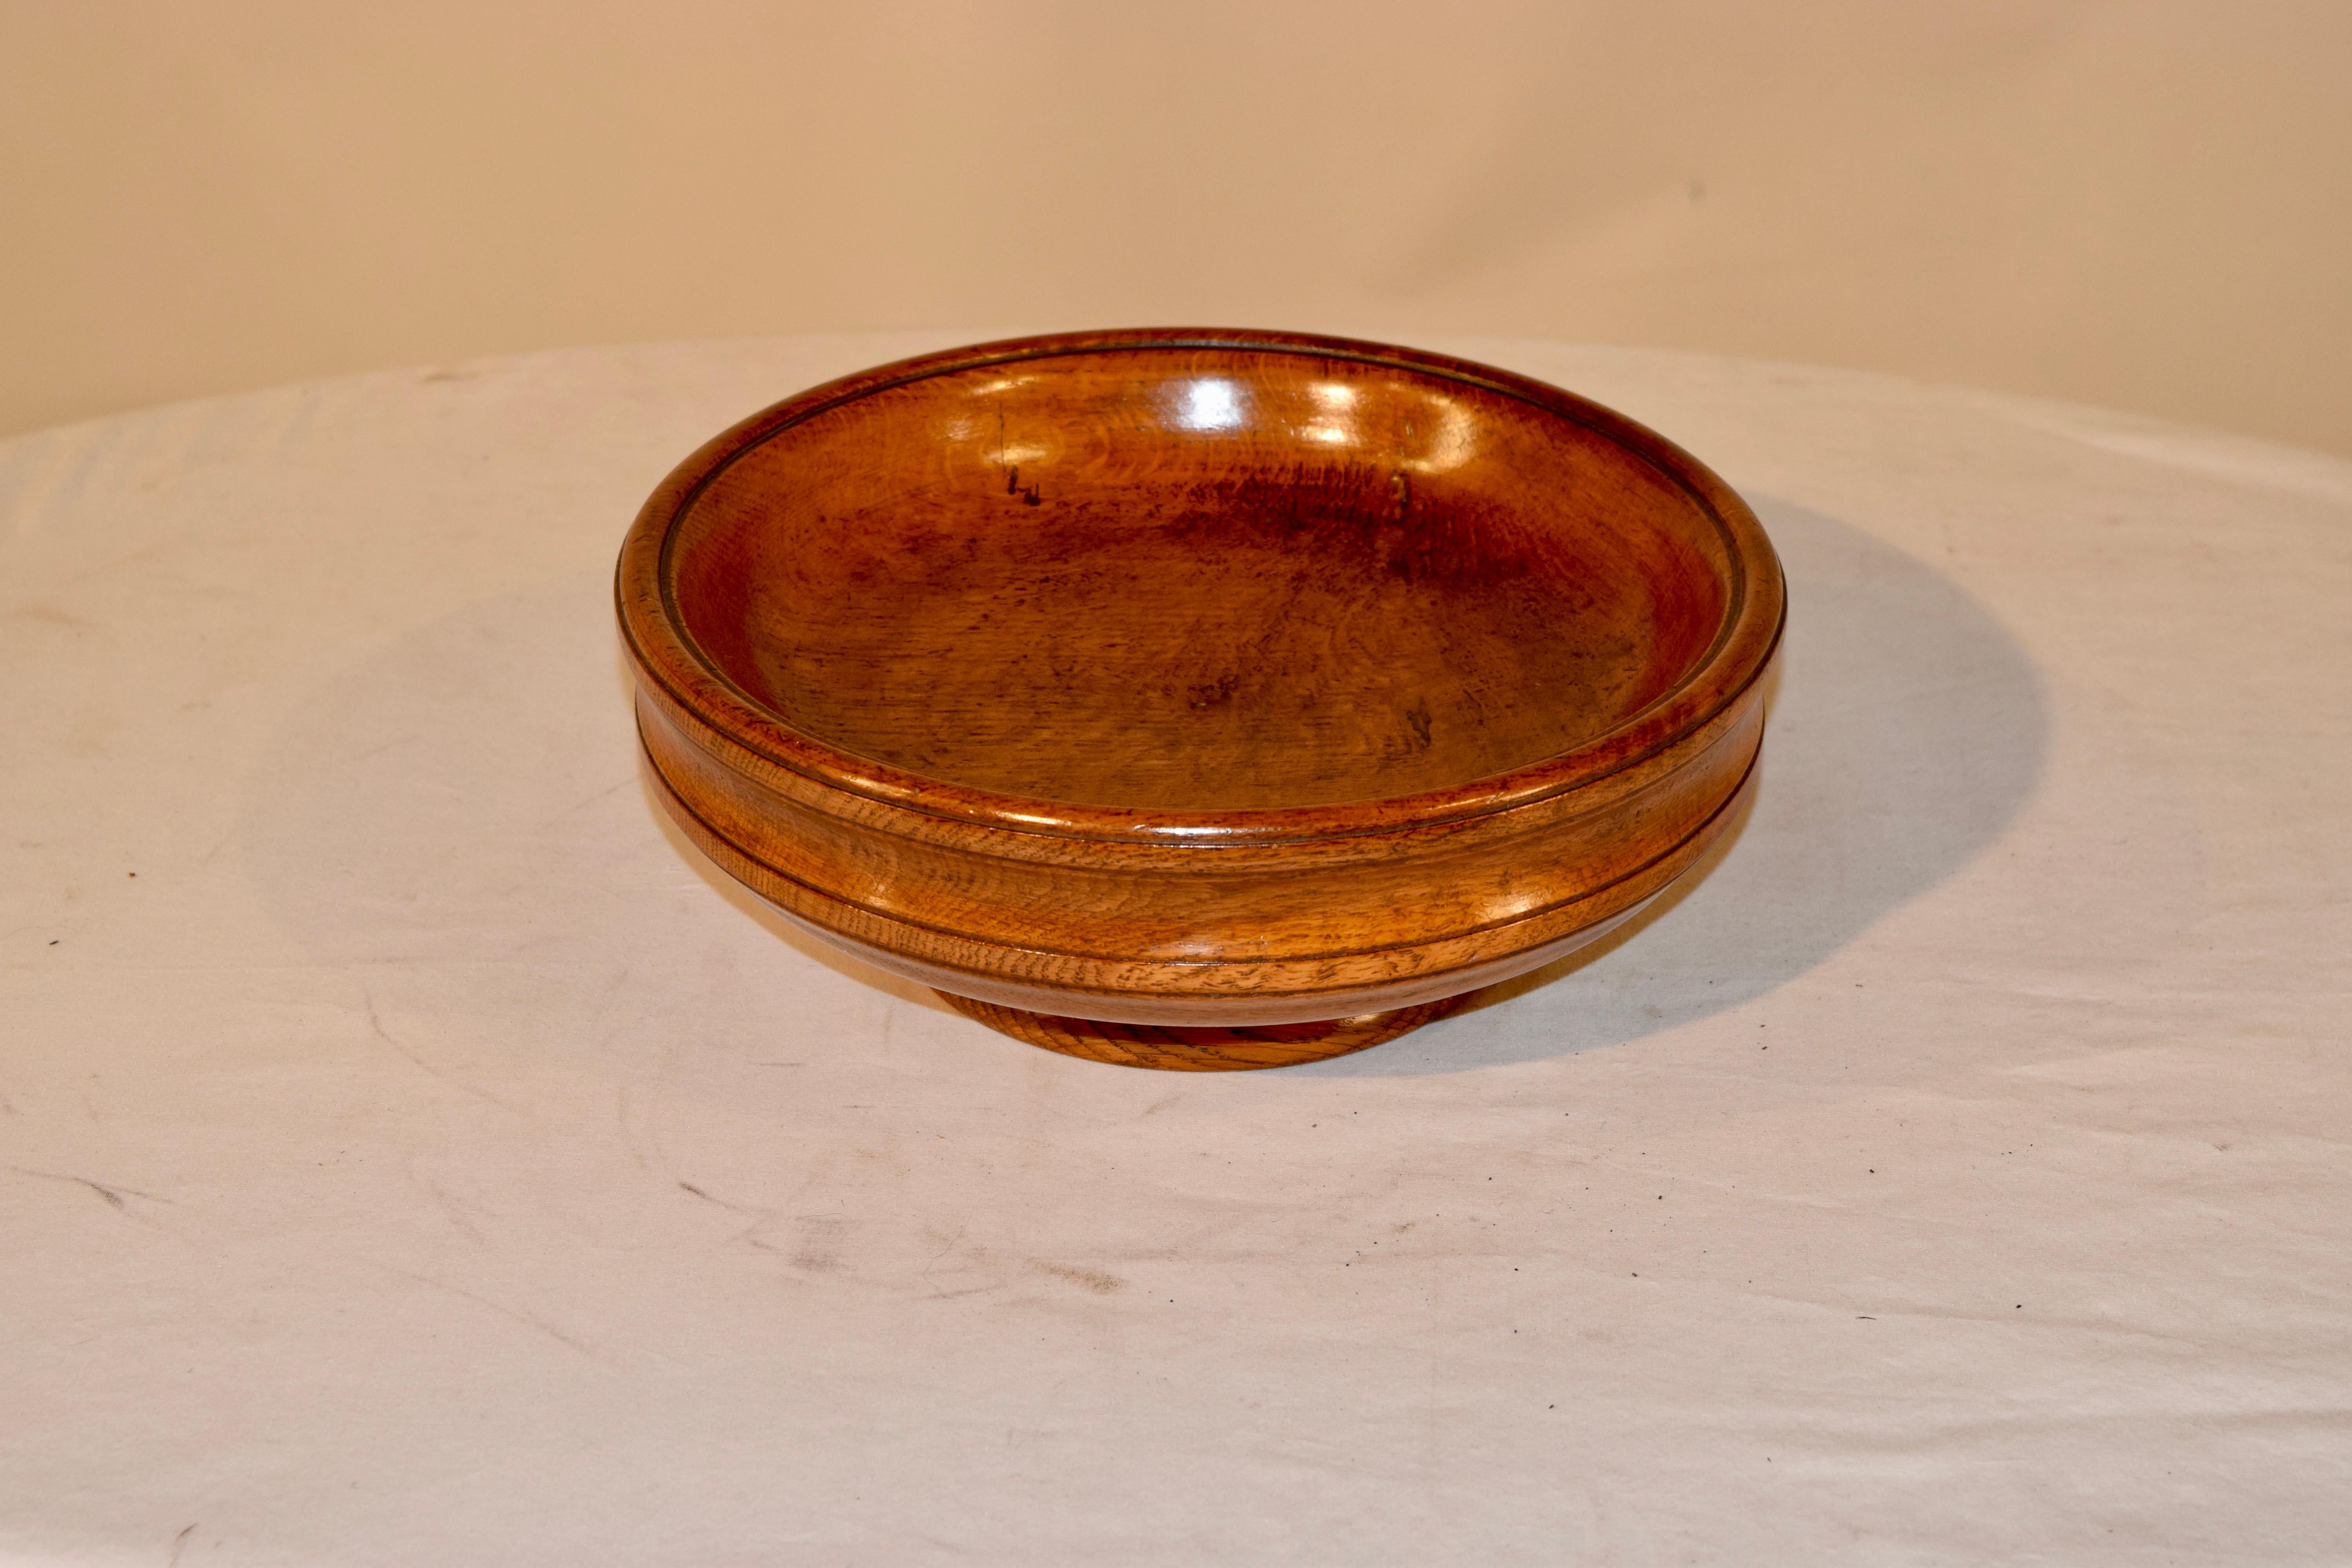 Oak footed bowl from England, circa 1900. Nicely turned and decorated. Supported on a base with a molded edge.